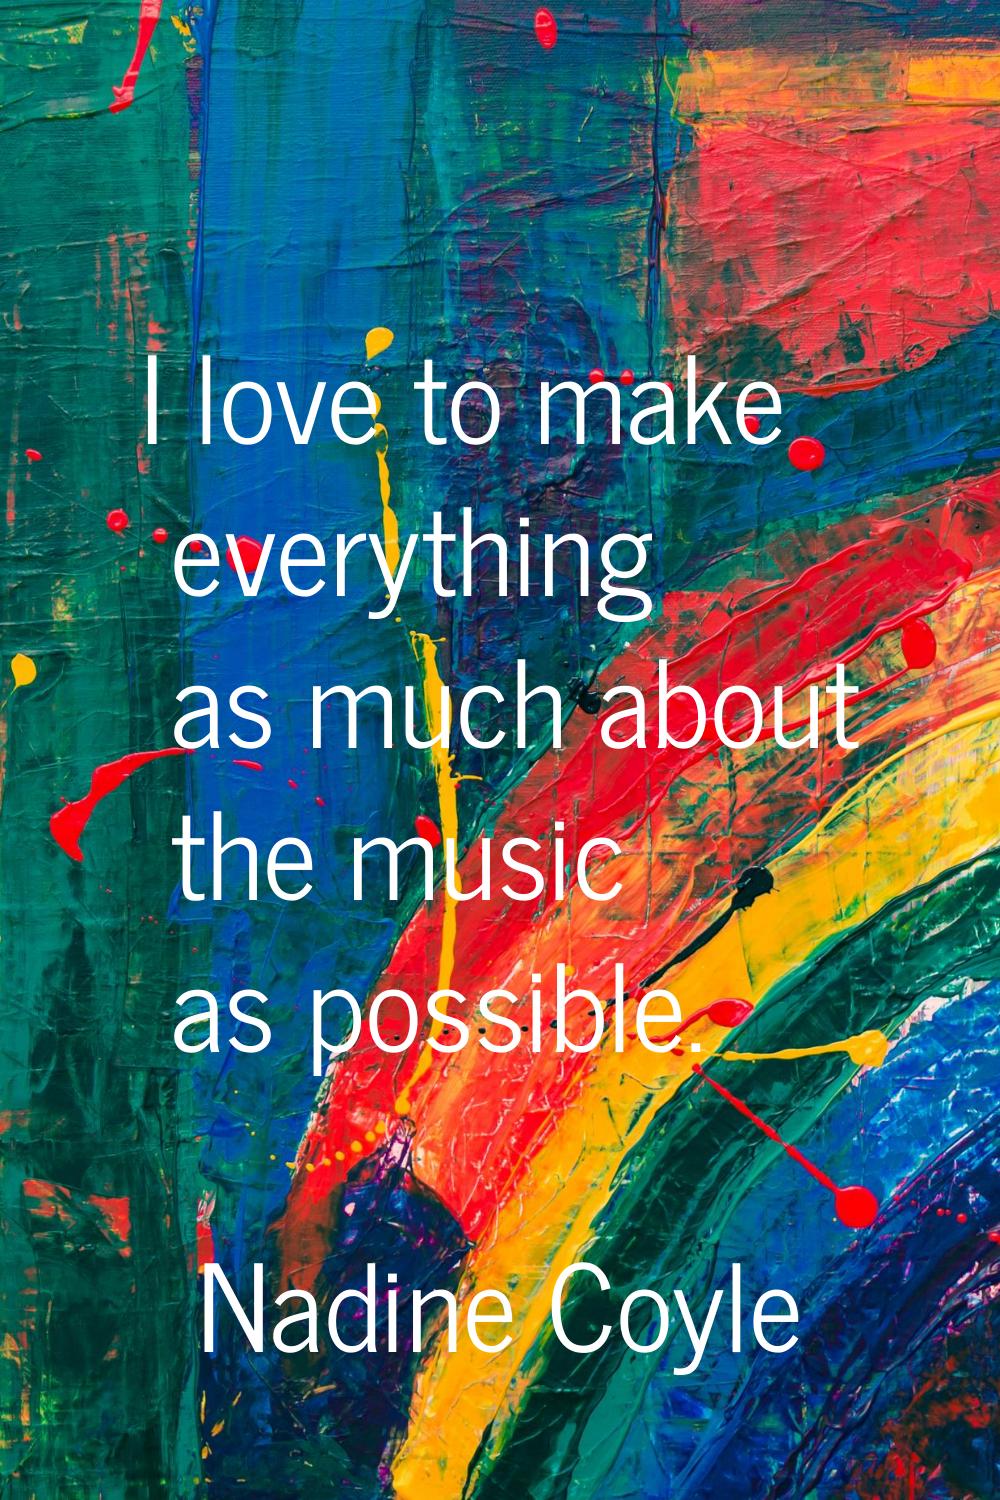 I love to make everything as much about the music as possible.